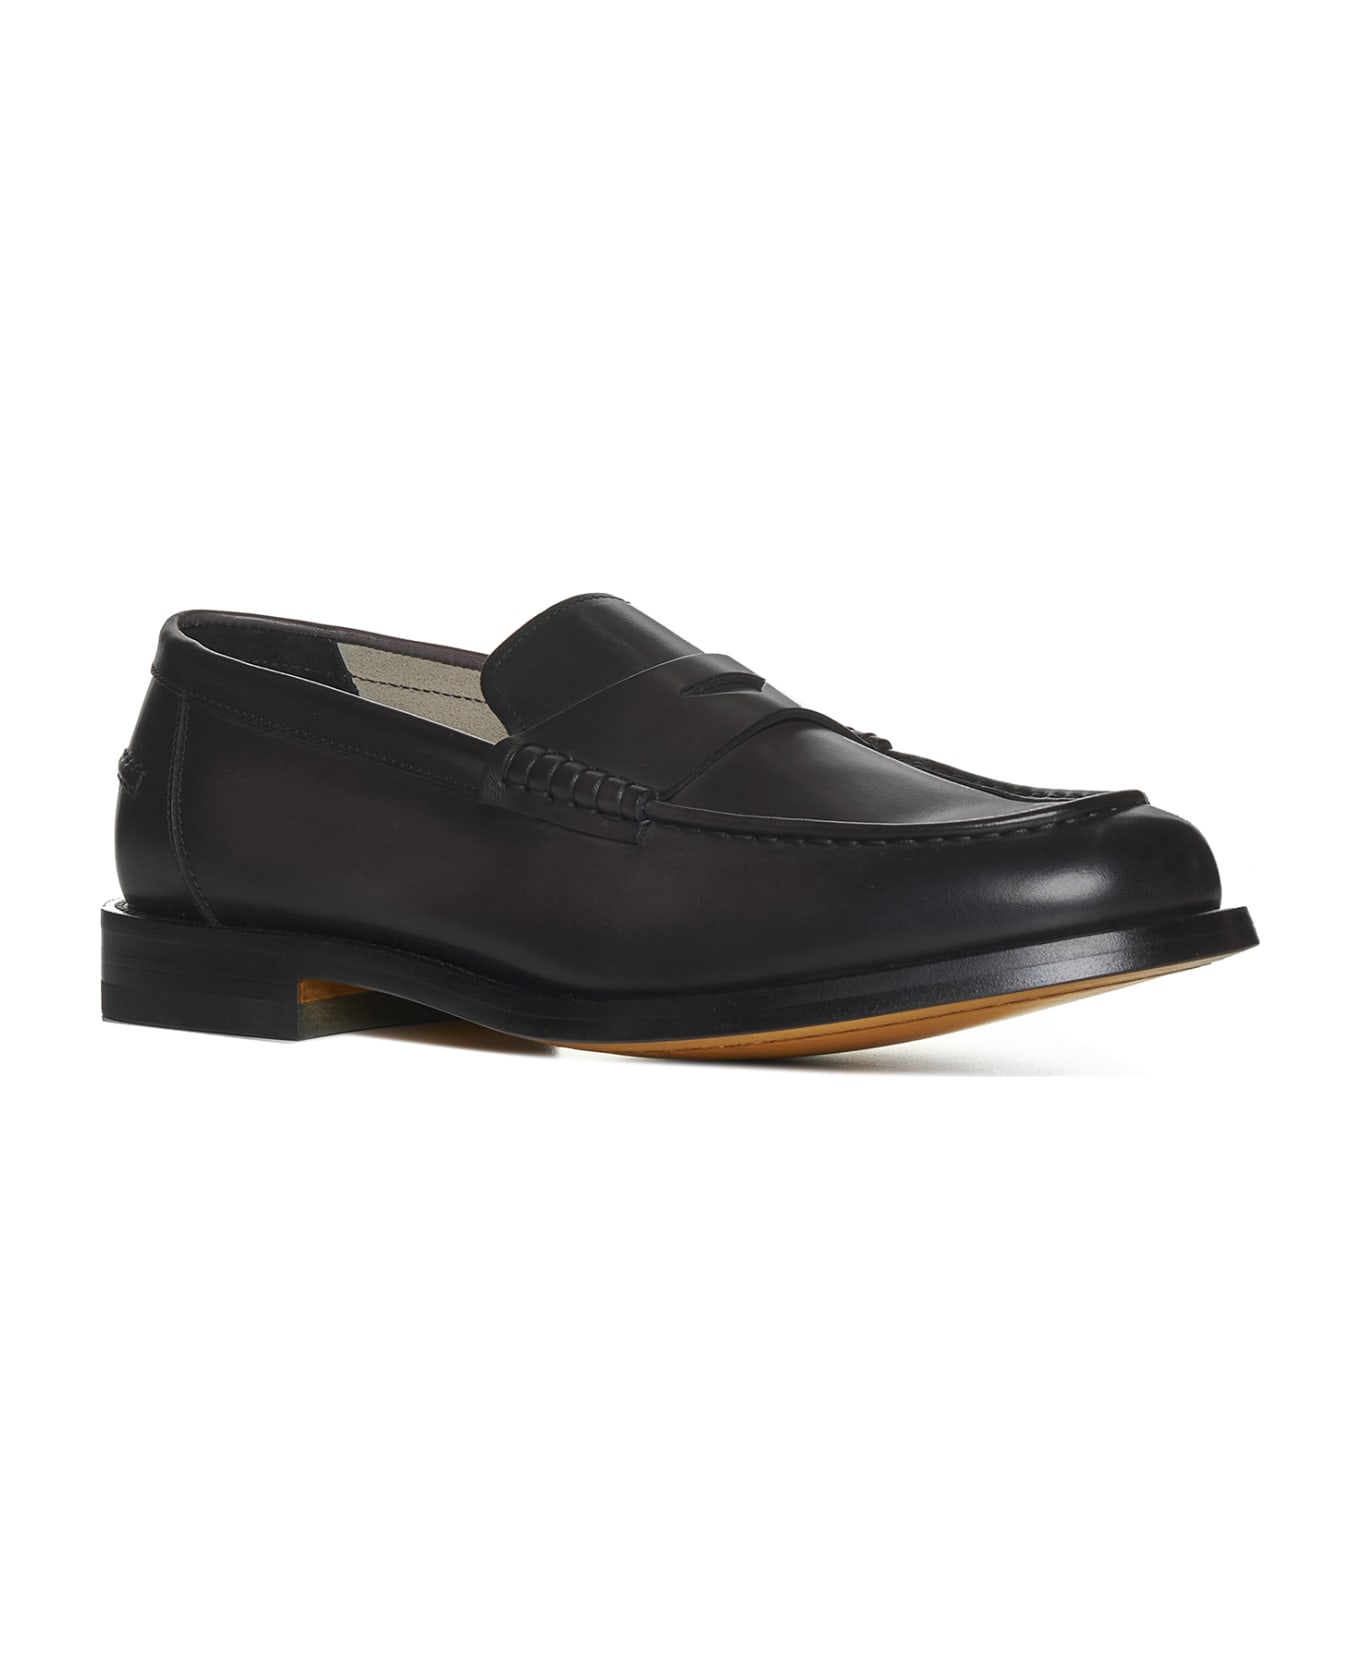 Doucal's Loafers - Iron+f.do nero